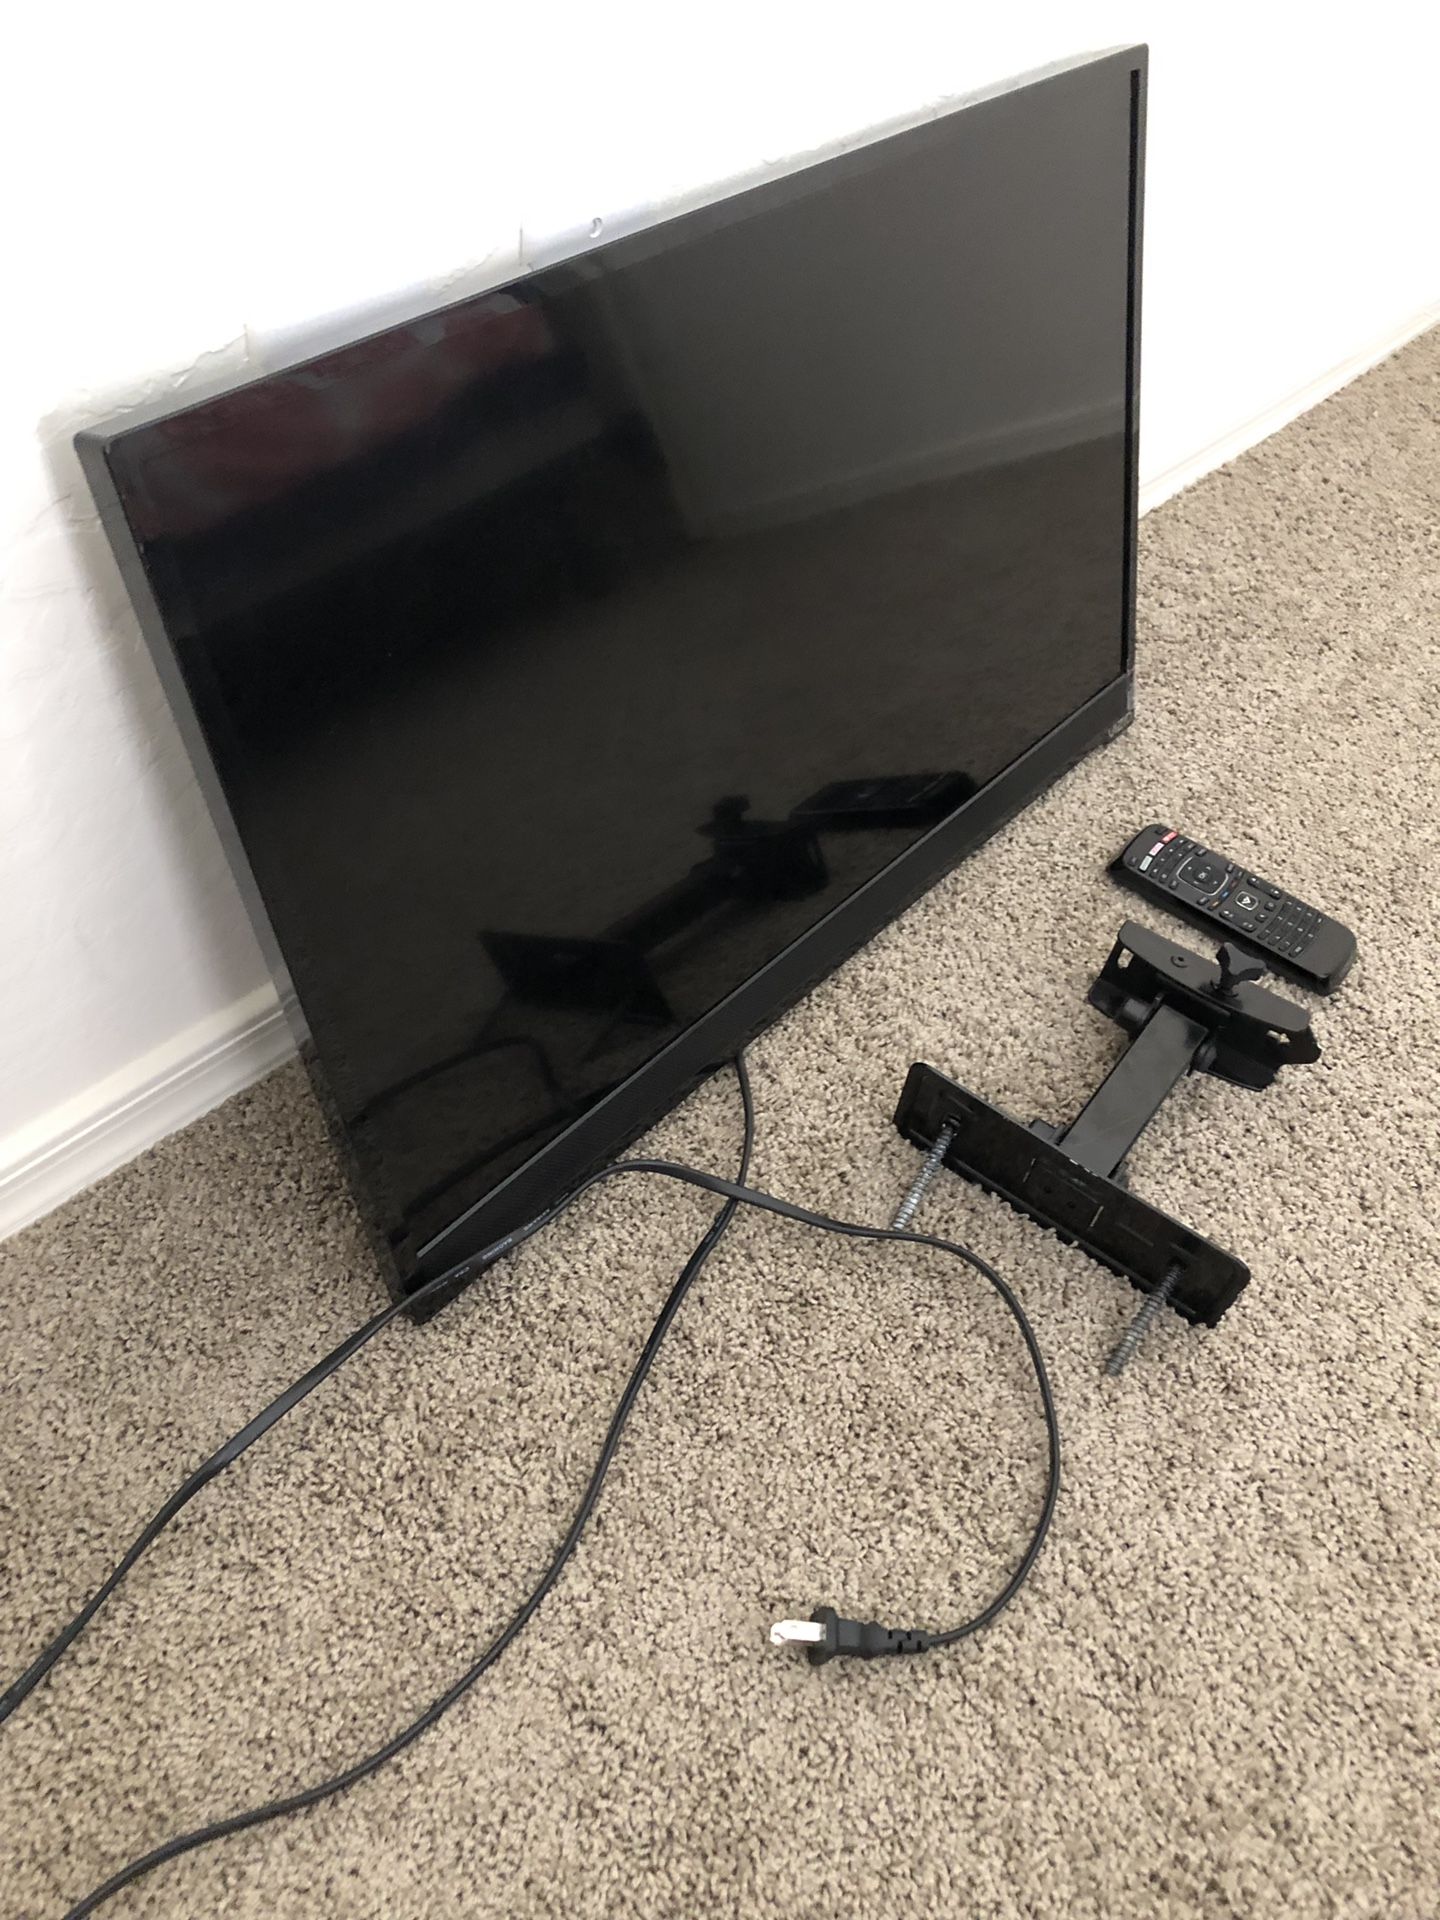 Vizio Smart TV 30inch with Wall Mount